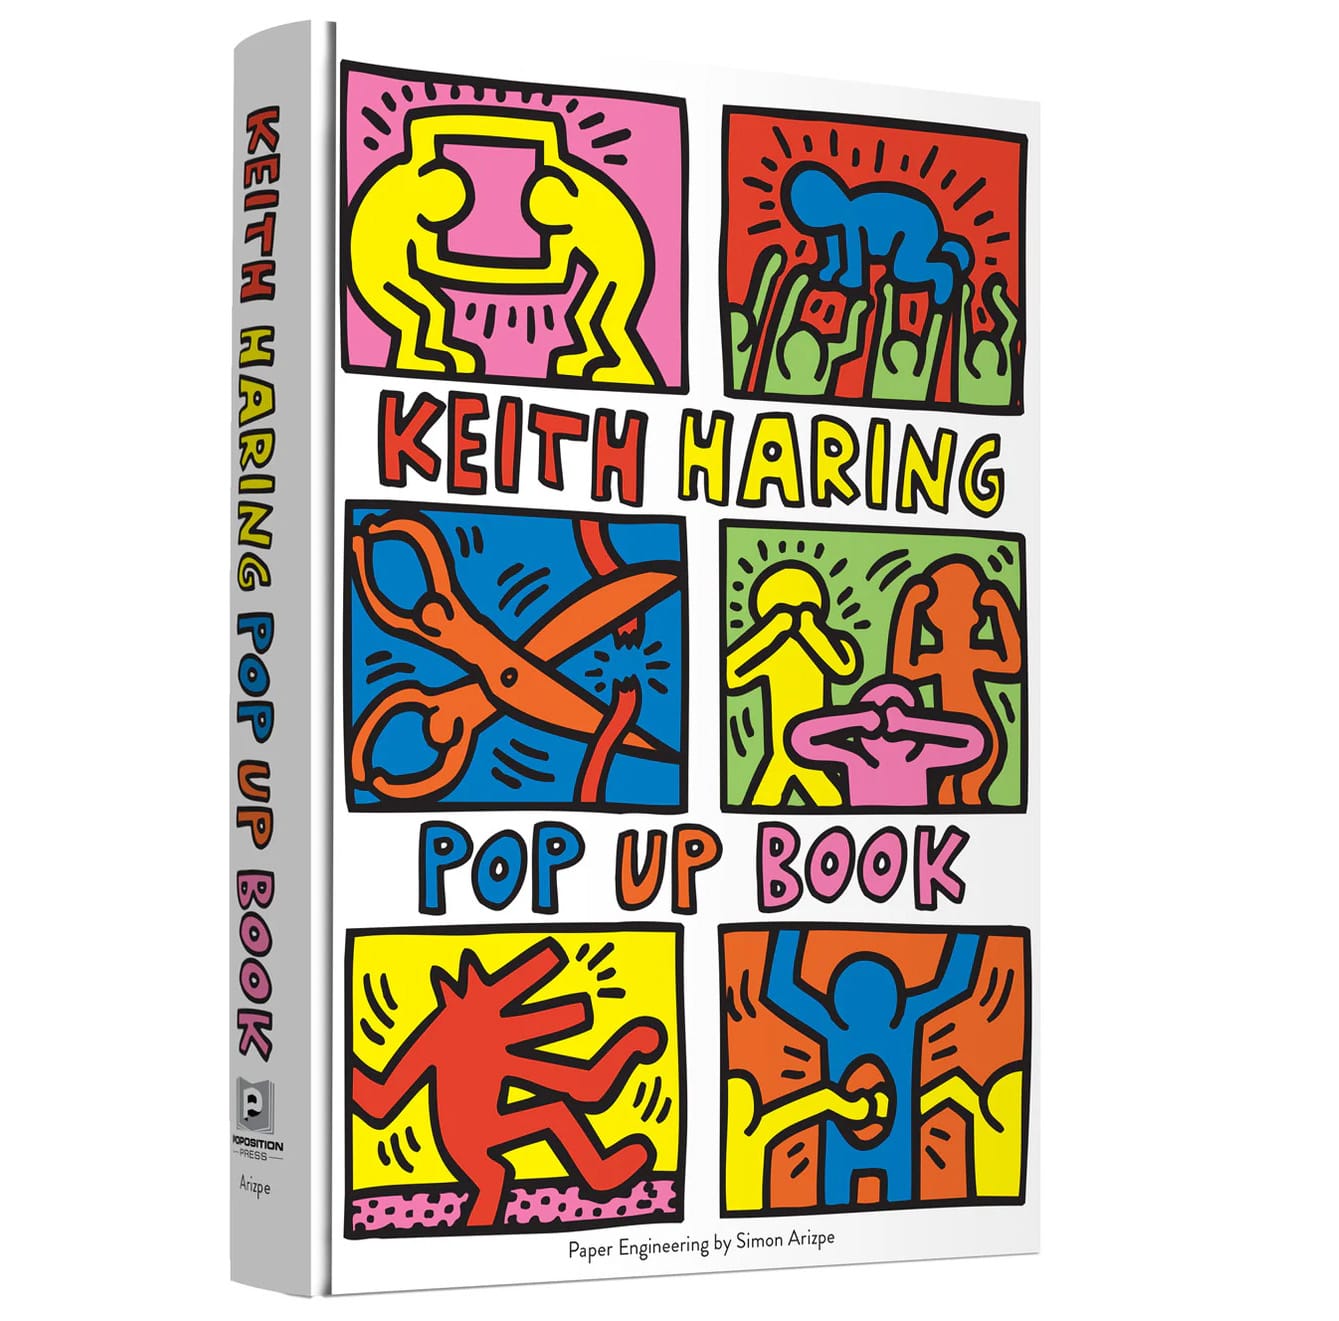 the cover of the book 'Keith Haring Pop Up Book' with a grid of six images featuring cartoonish figures interacting